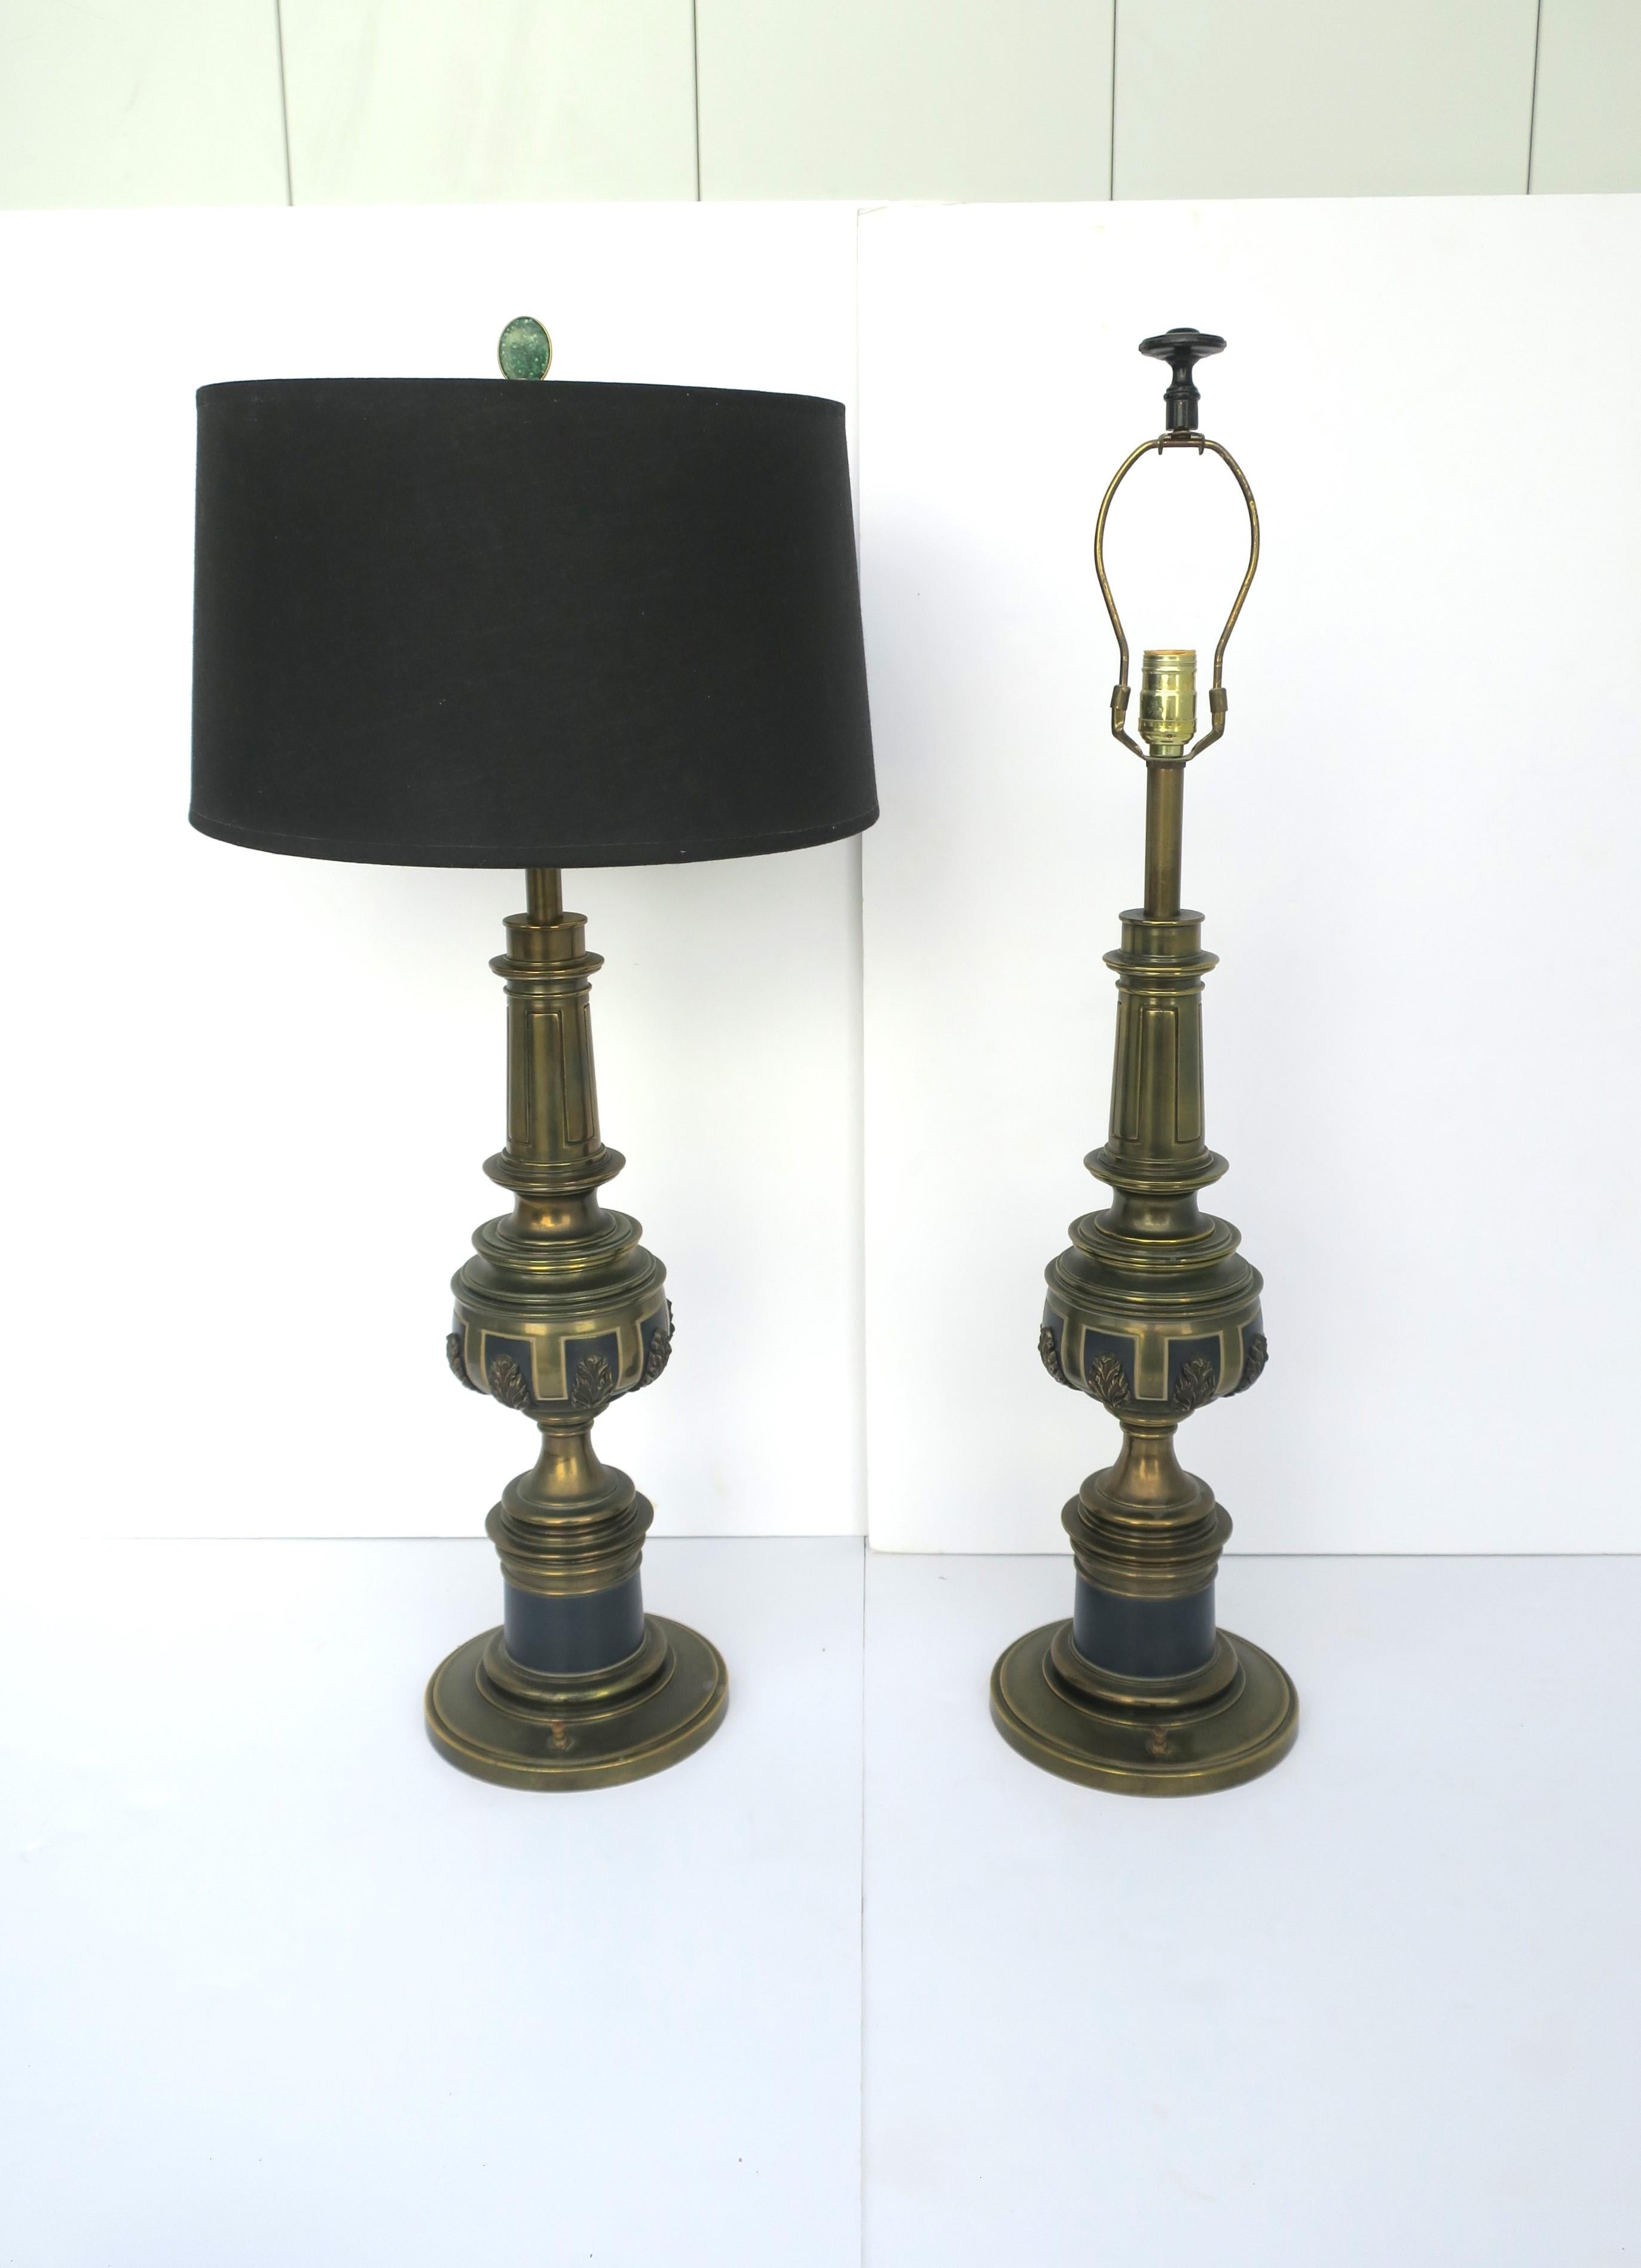 A substantial pair of tall brass table lamps with black matte enamel and leaf detailing by Stiffel, circa mid-20th century, 1960s. On/off switch conveniently located on front/center base area and at top socket. 

Each lamp measures: 
27.75